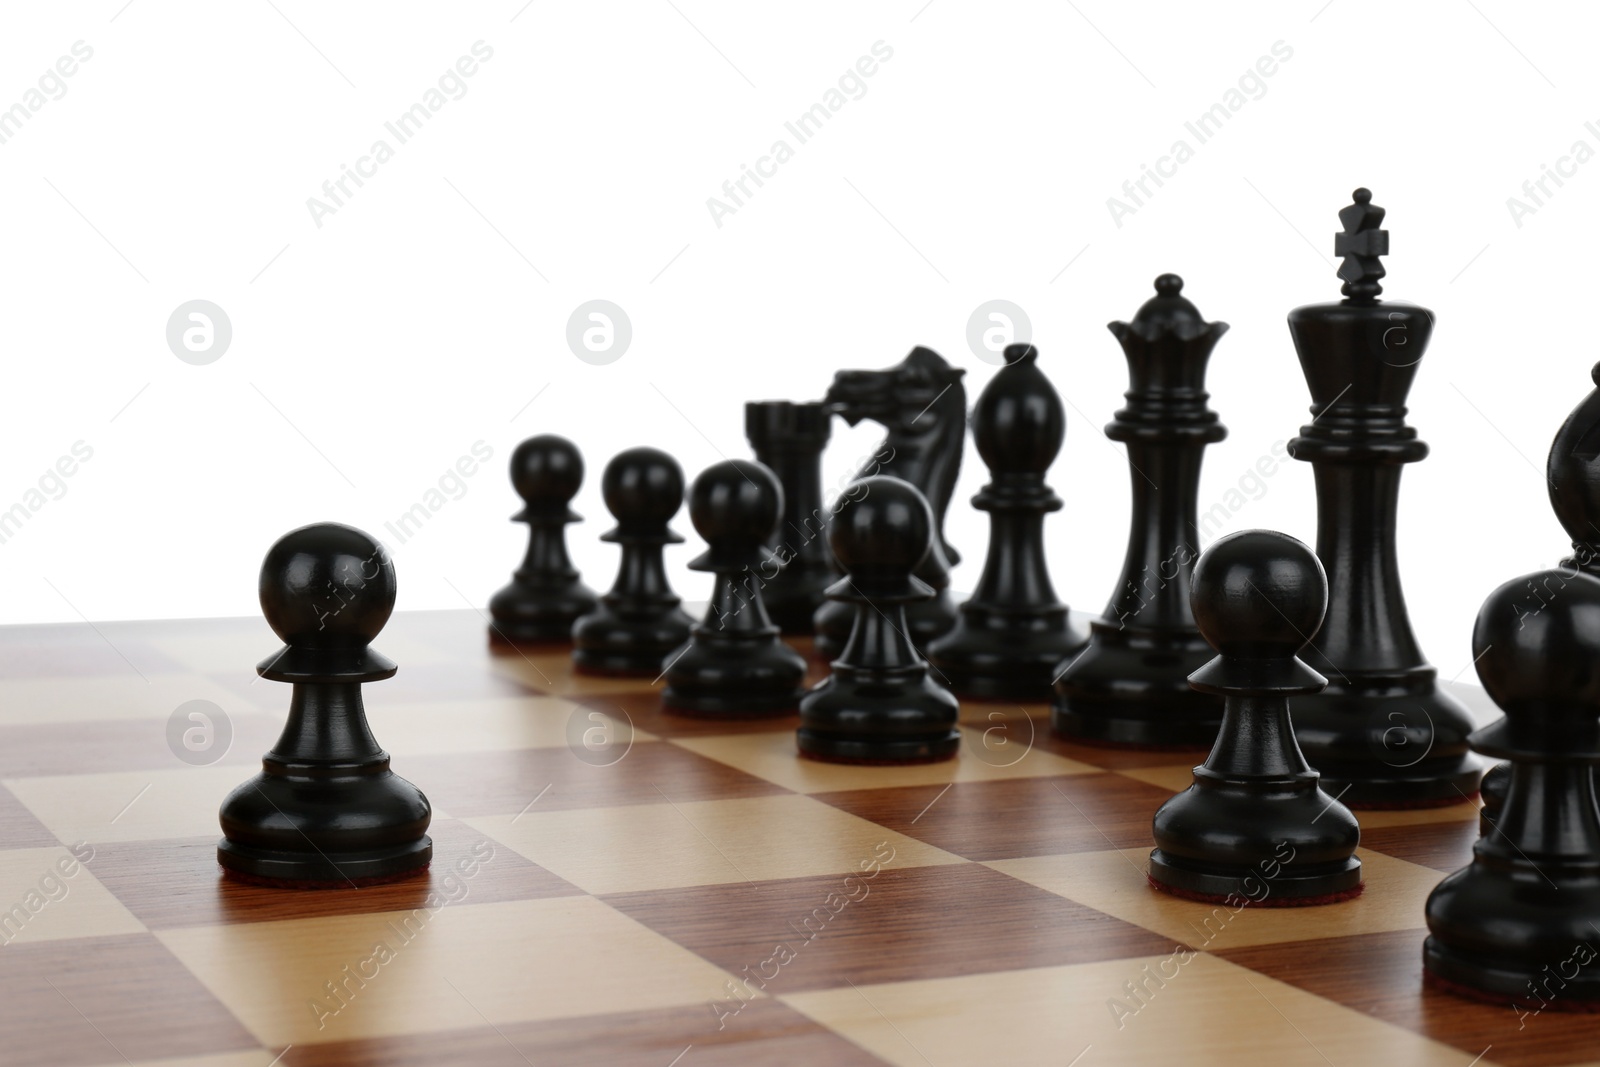 Photo of Black pawn in front of other chess pieces on wooden board against white background